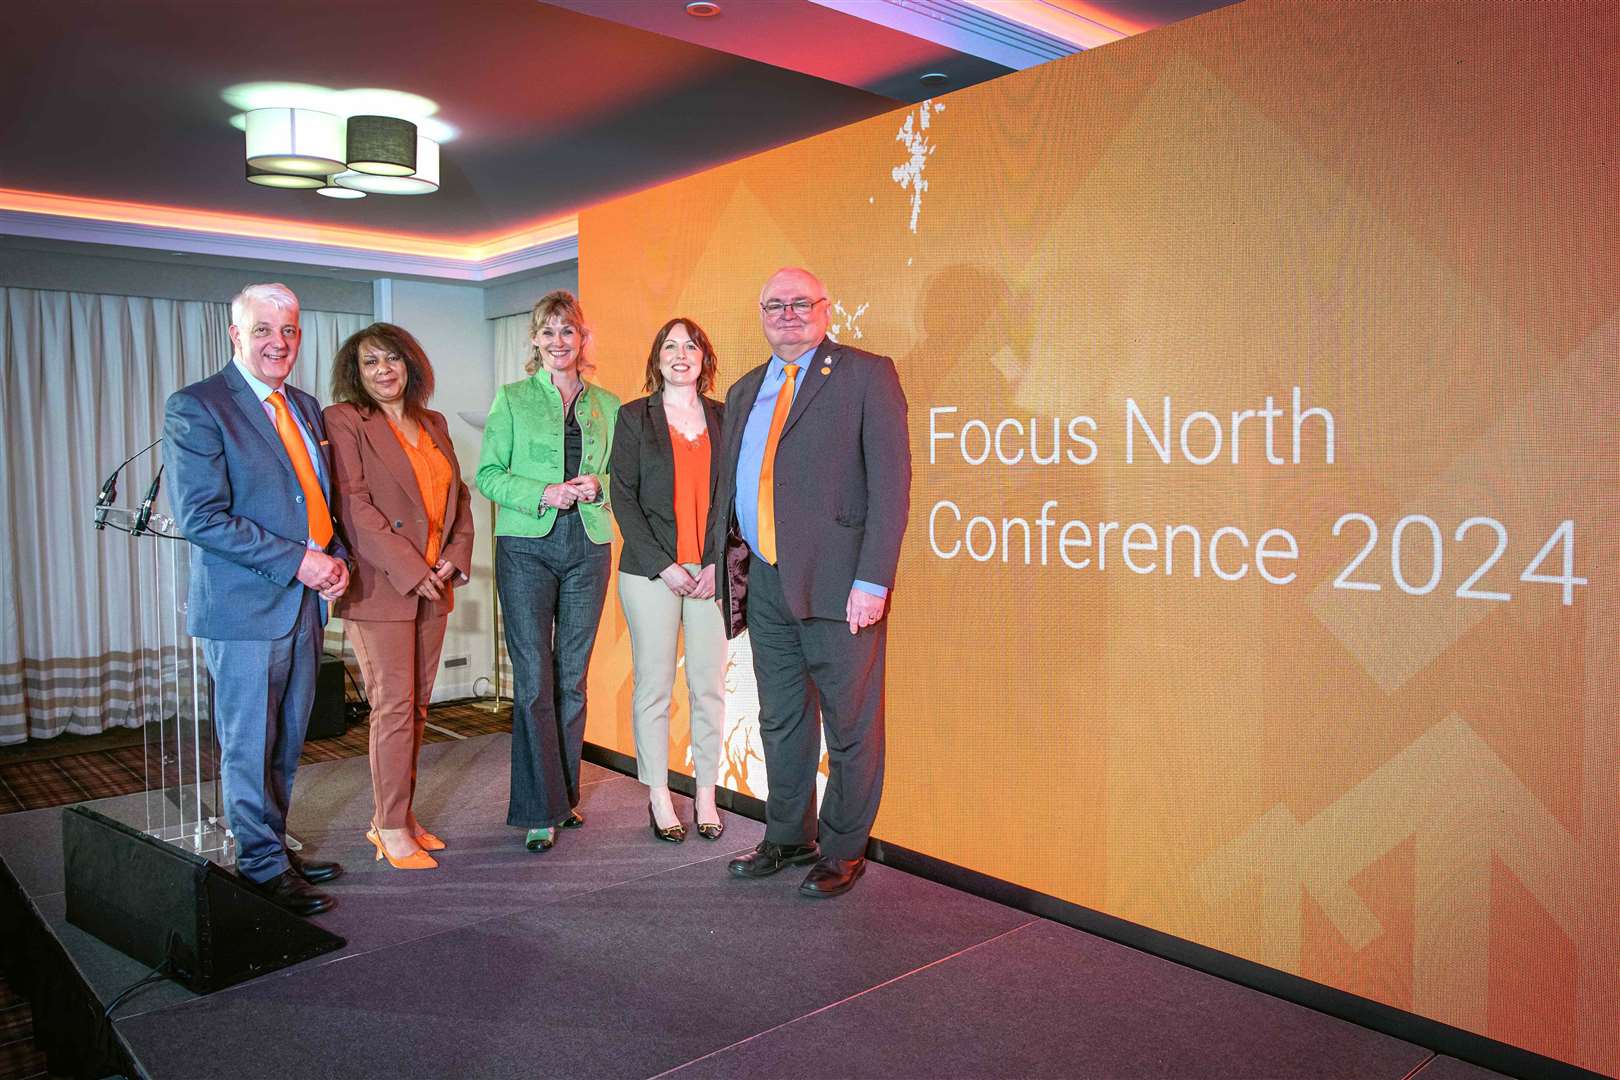 Focus North programme team with host Nicky Marr. From left, Peter Faccenda, Catherine Souter, Nicky Marr, Nicola More and Simon Middlemas. Picture: Focus North